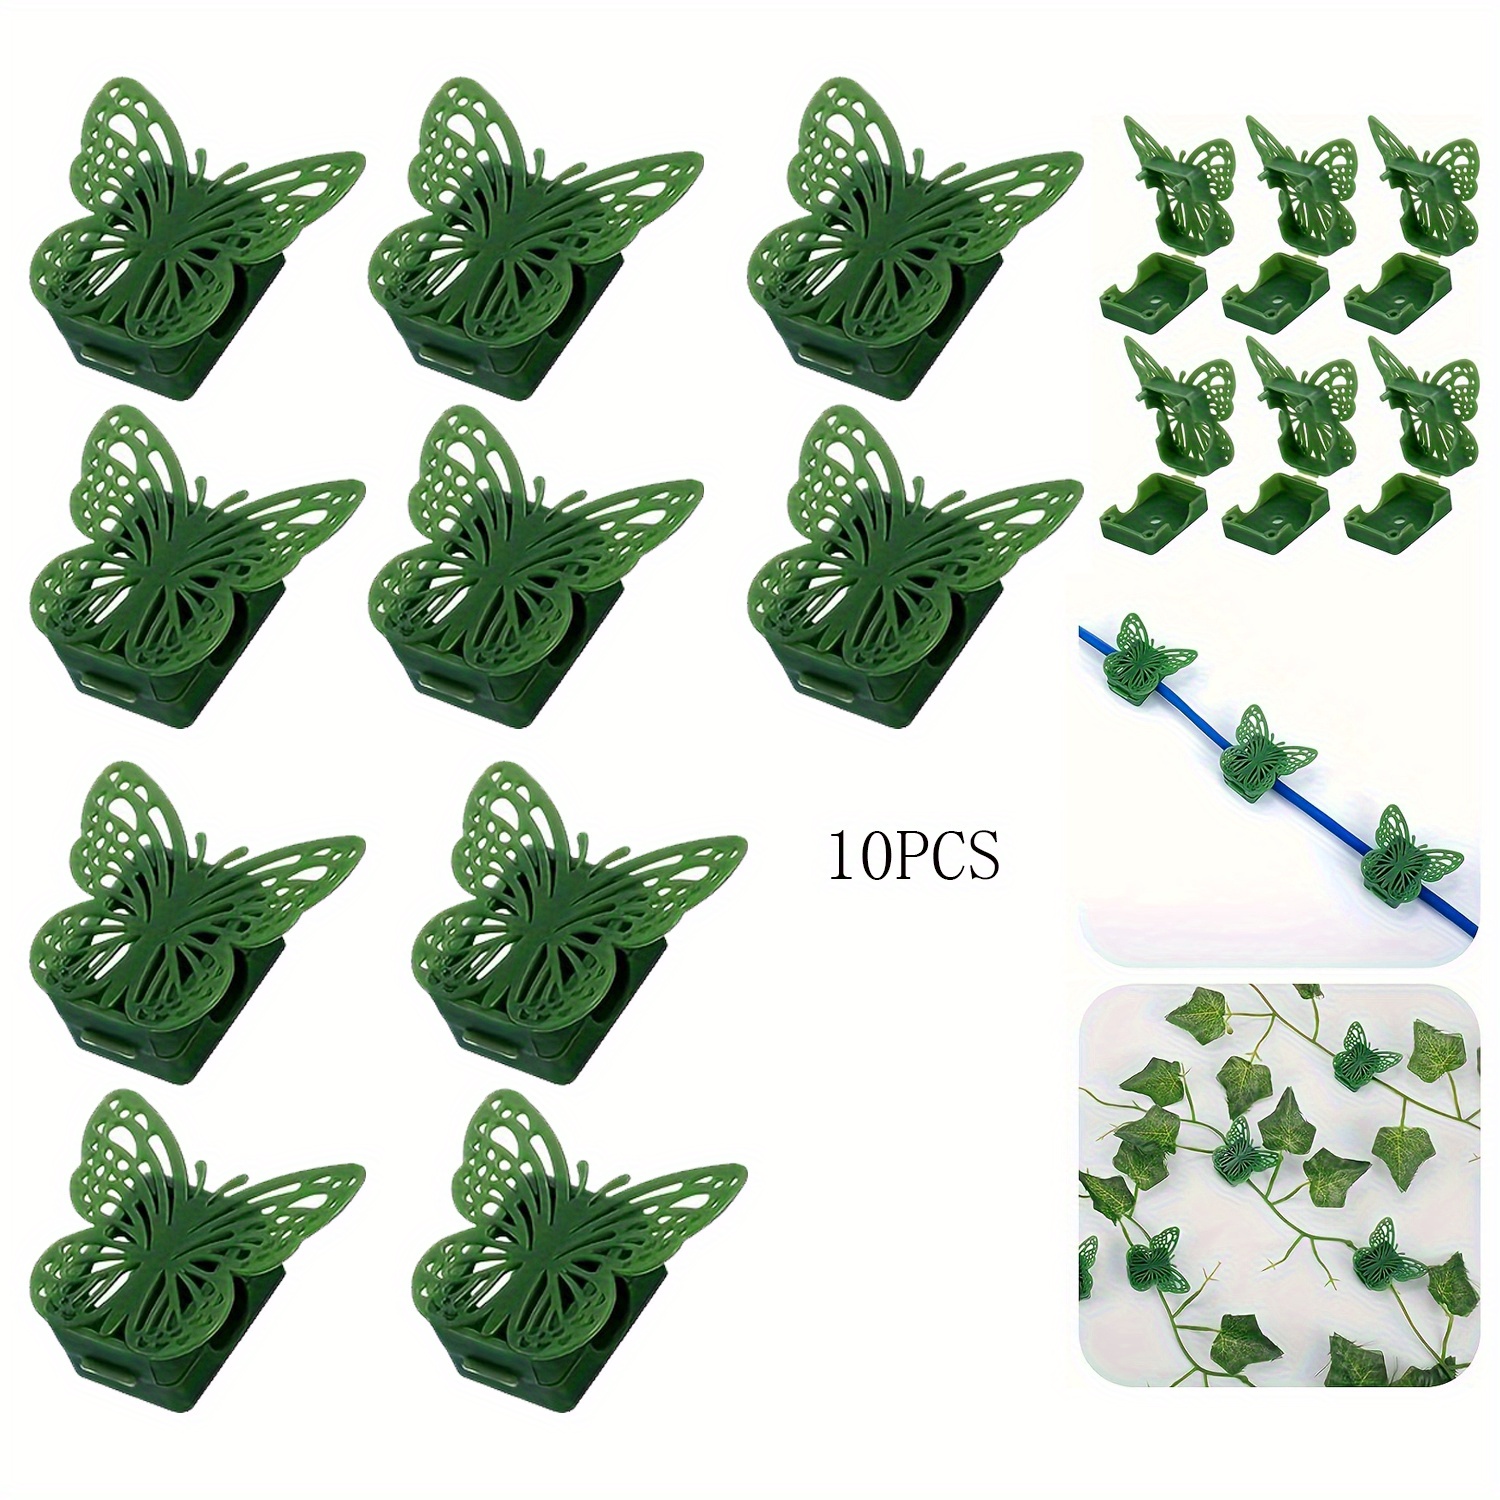 

10pcs, Plant Climbing Wall Fixture Clips With Adhesive Stickers Spring Butterfly Shape Vine Fixer Clips For Climbing Plants Indoor Outdoor Fixing Vines Traction Invisible Holder